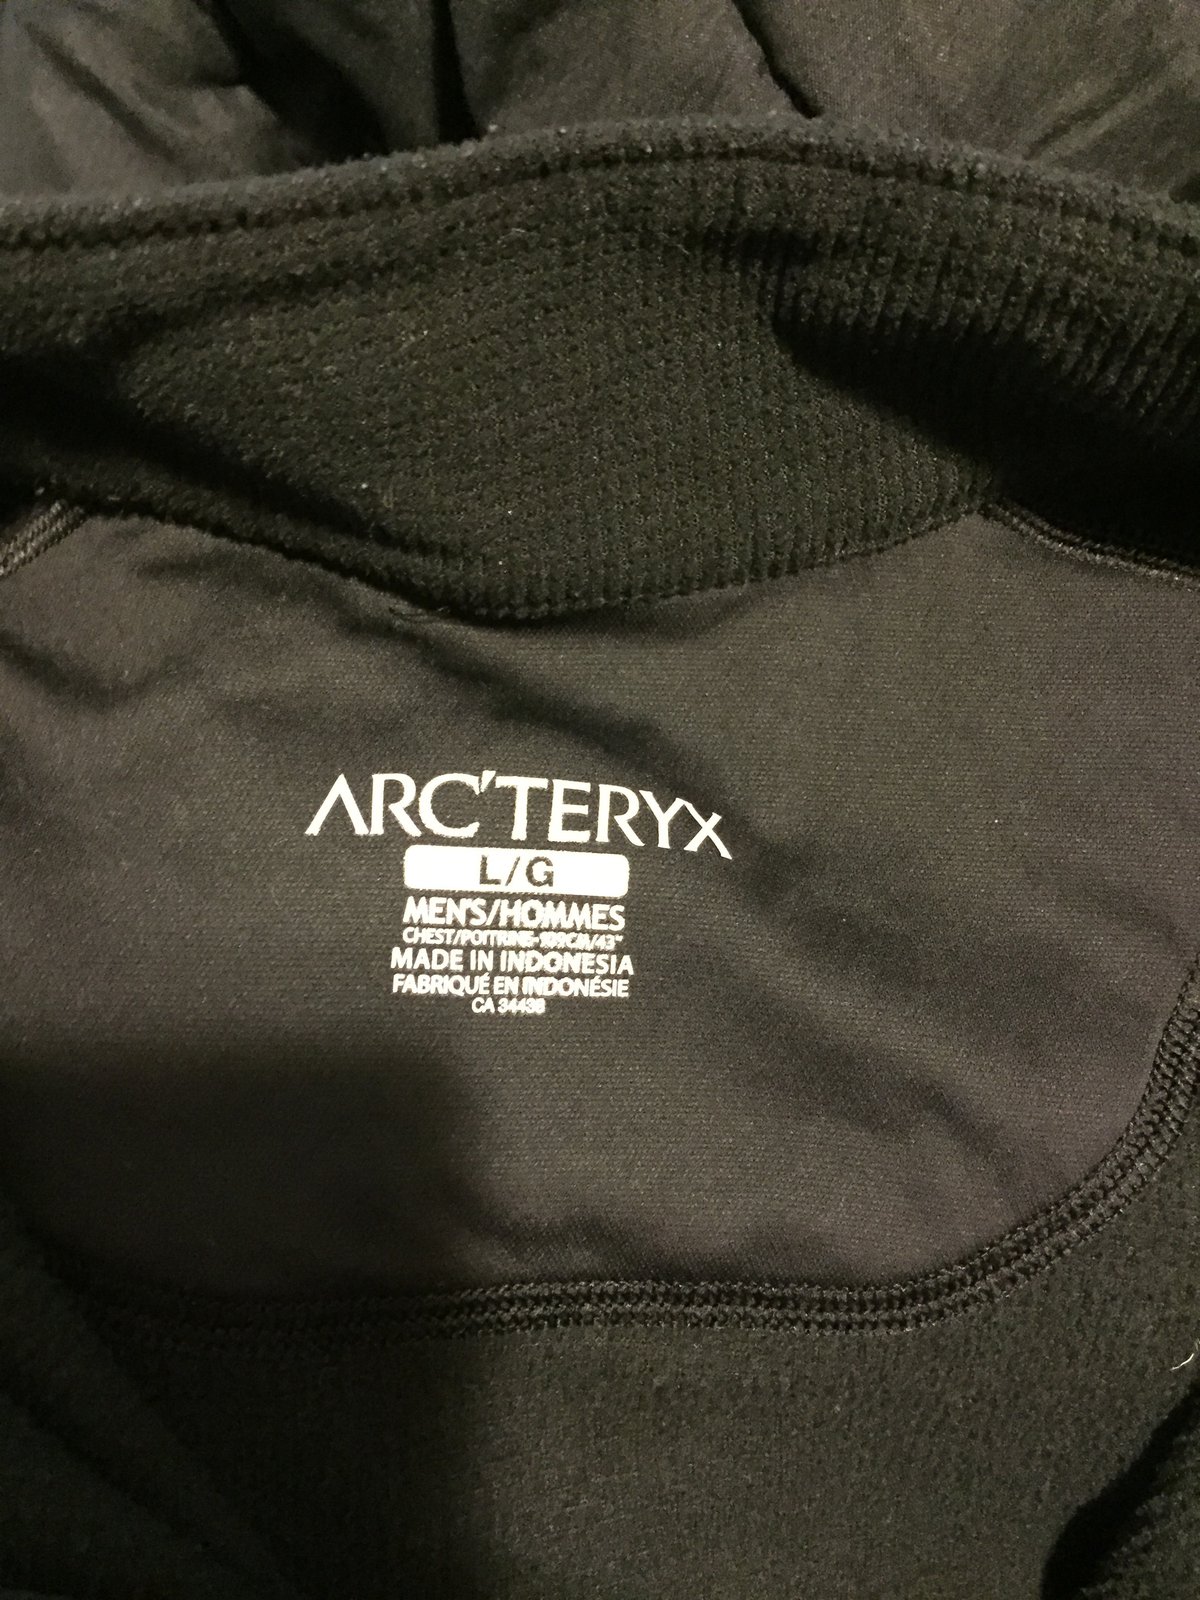 FS: Arc'teryx Clothing - Sell and Trade - Newschoolers.com